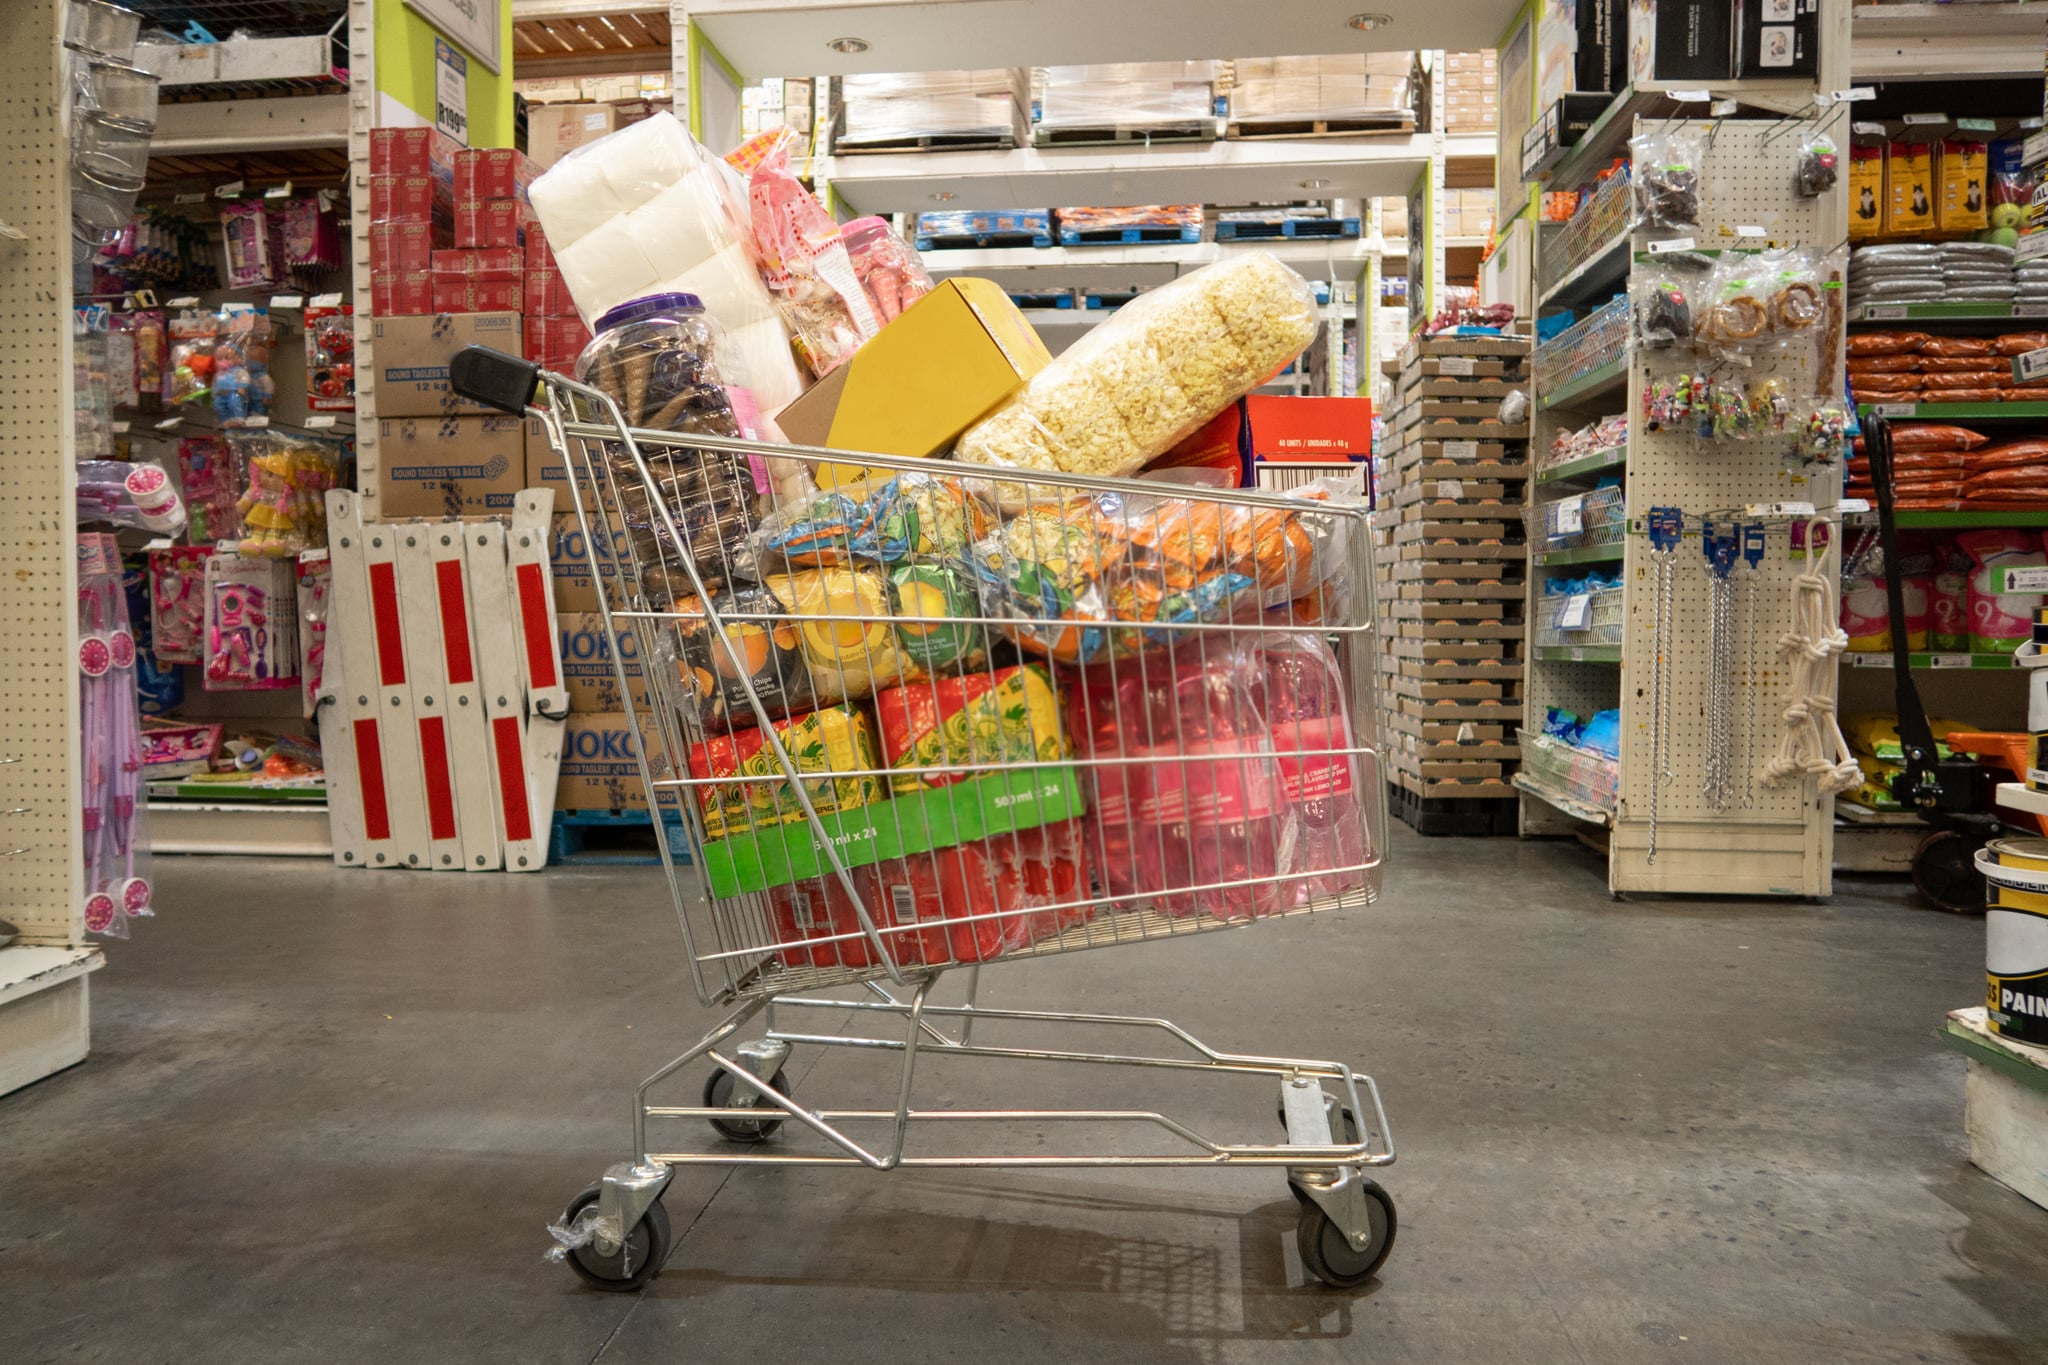 costco-price-tag-meanings-popsugar-family